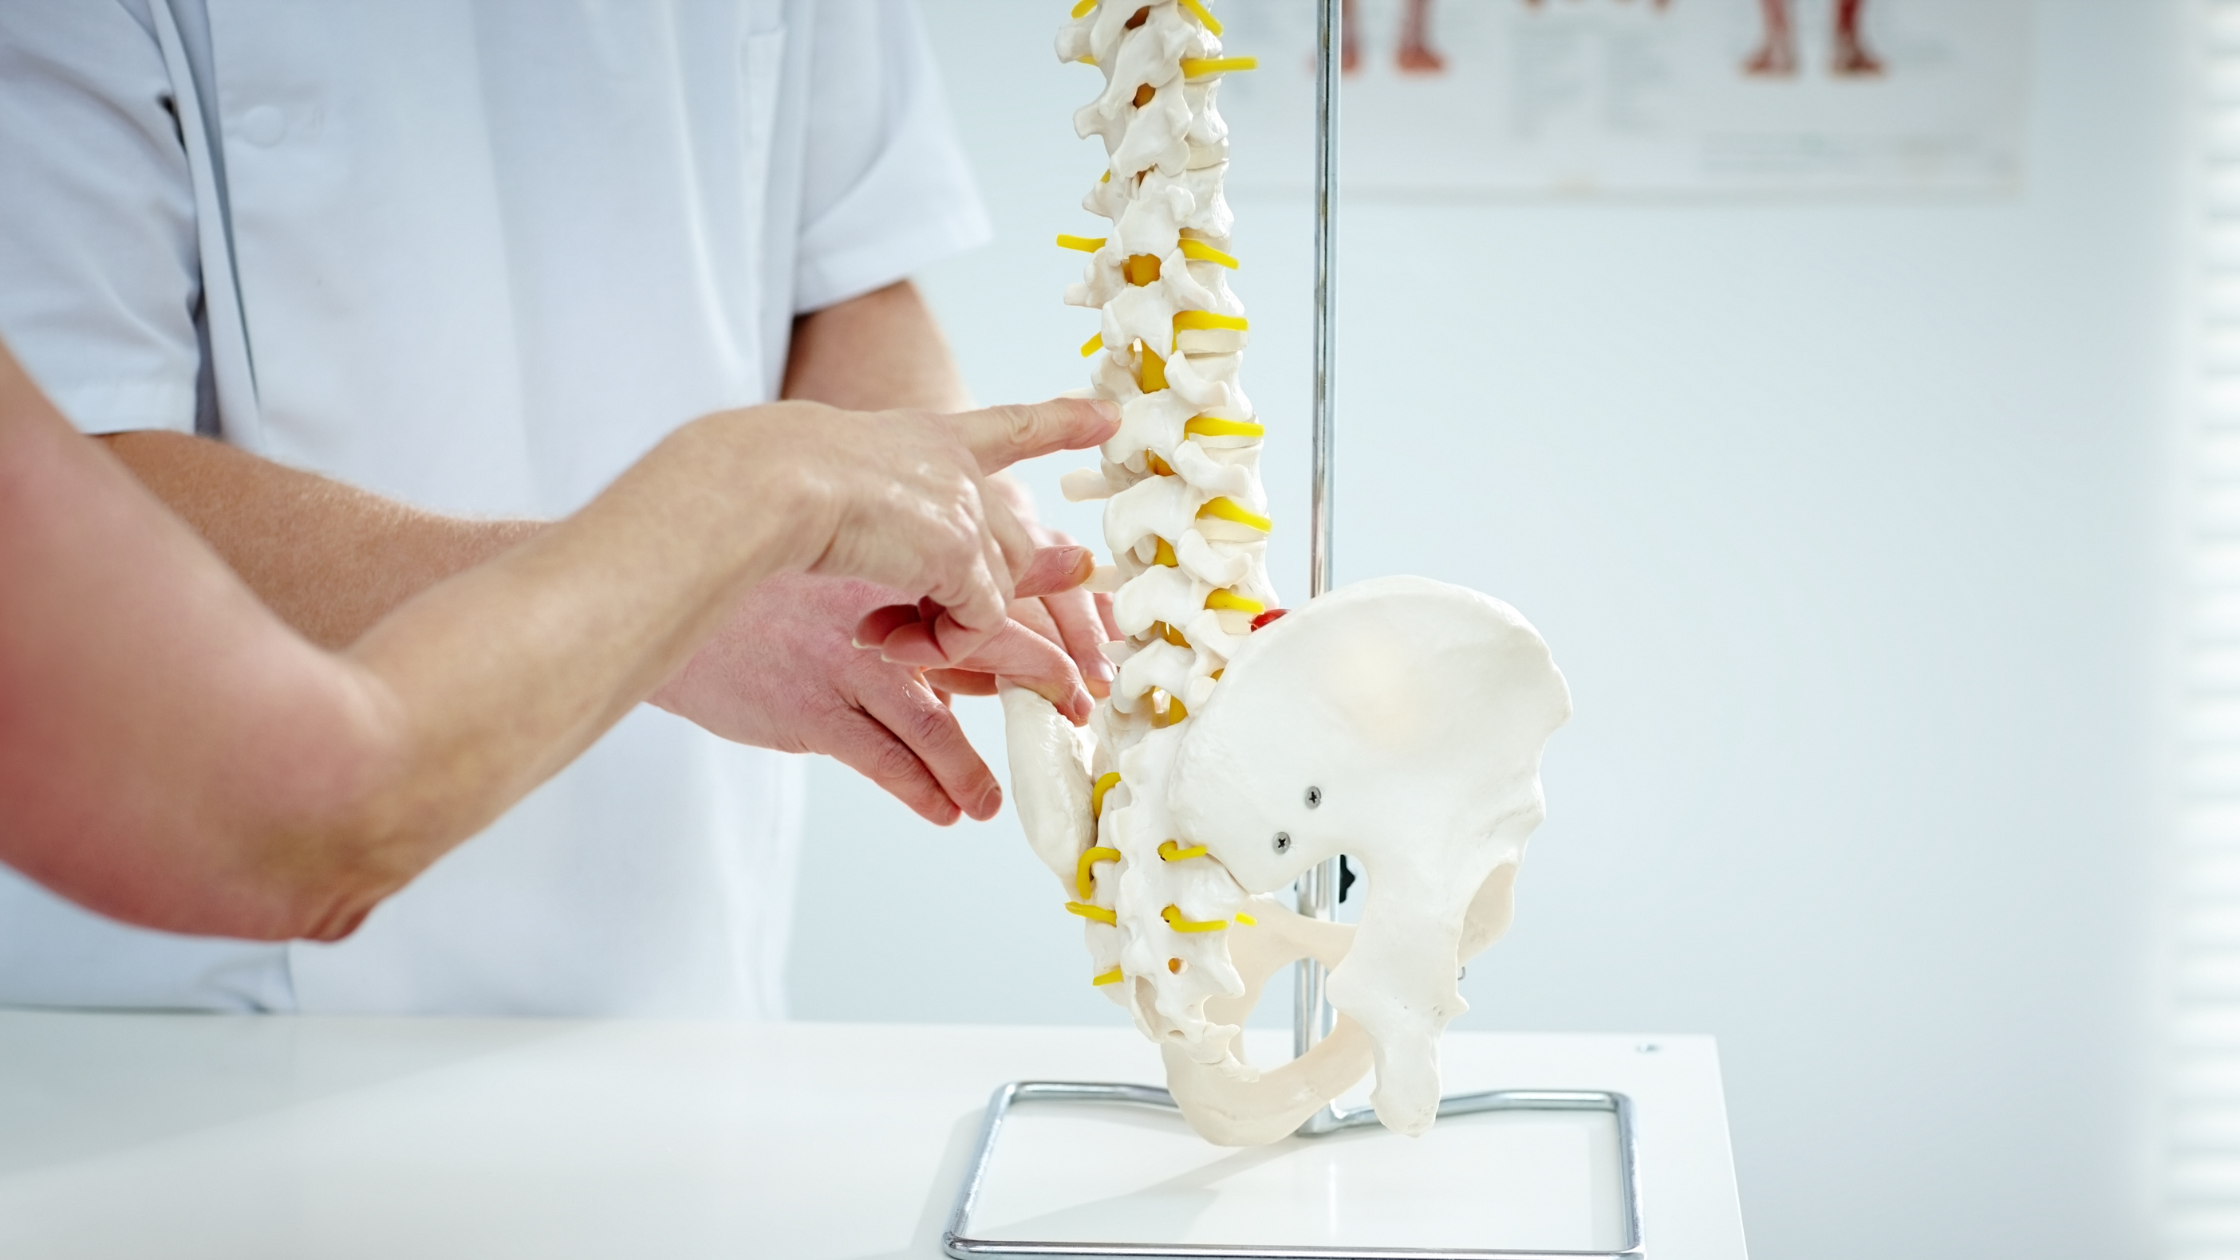 Why Chiropractic Care?